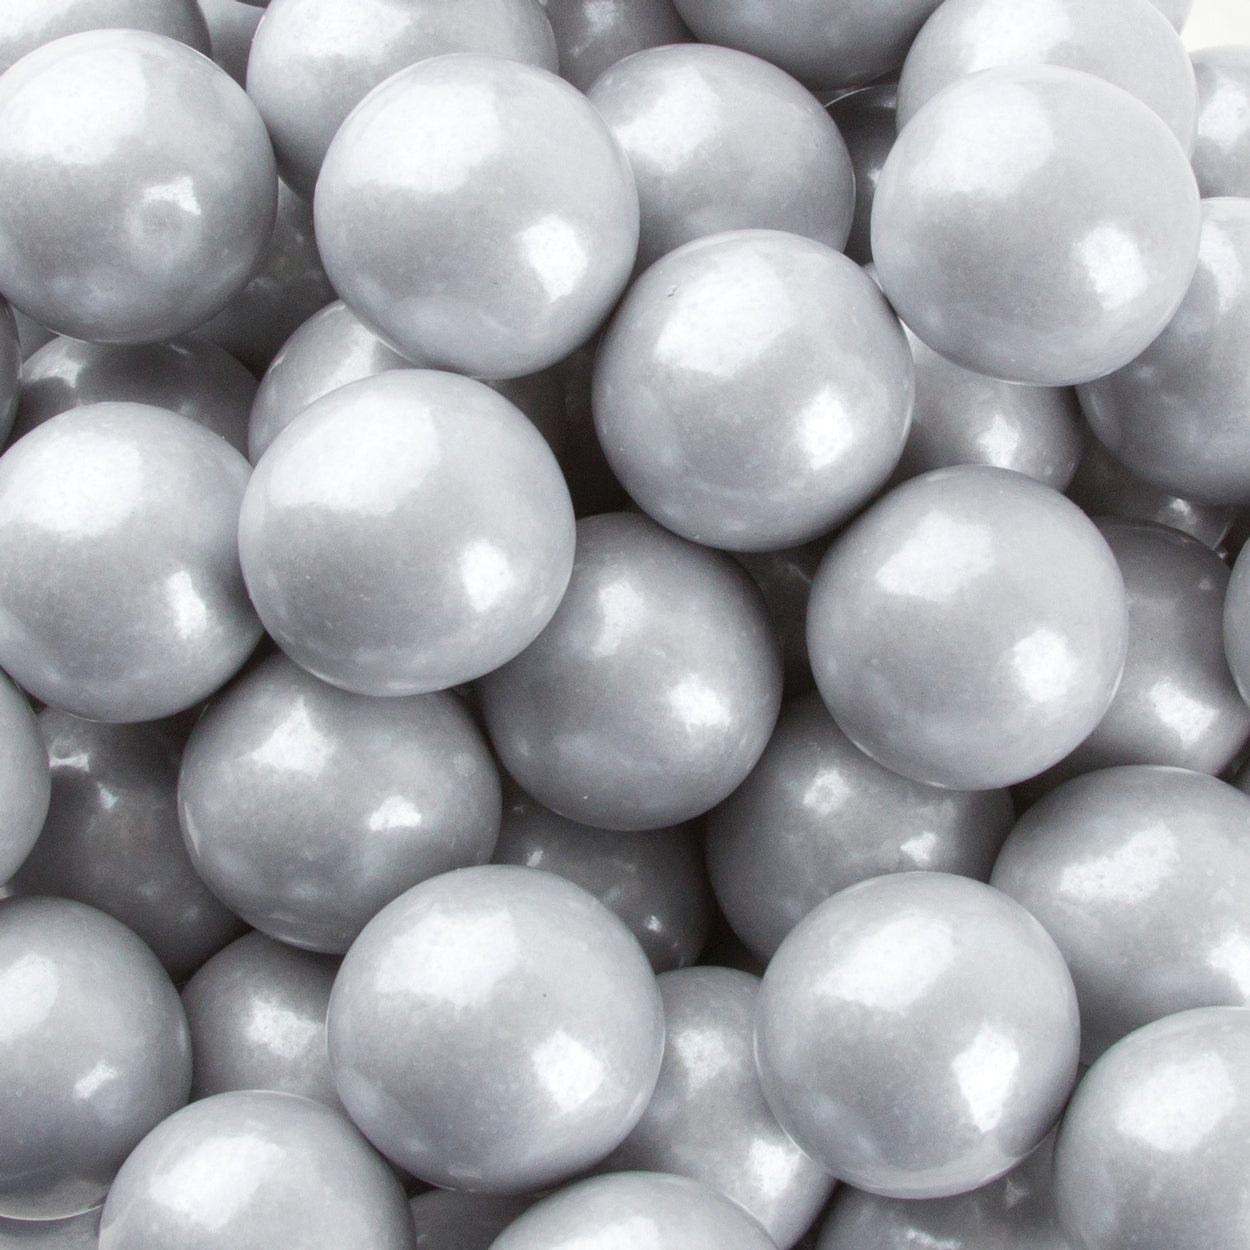 Silver Shimmer Pearl Gumballs - NY Spice Shop - Buy Gumballs Online